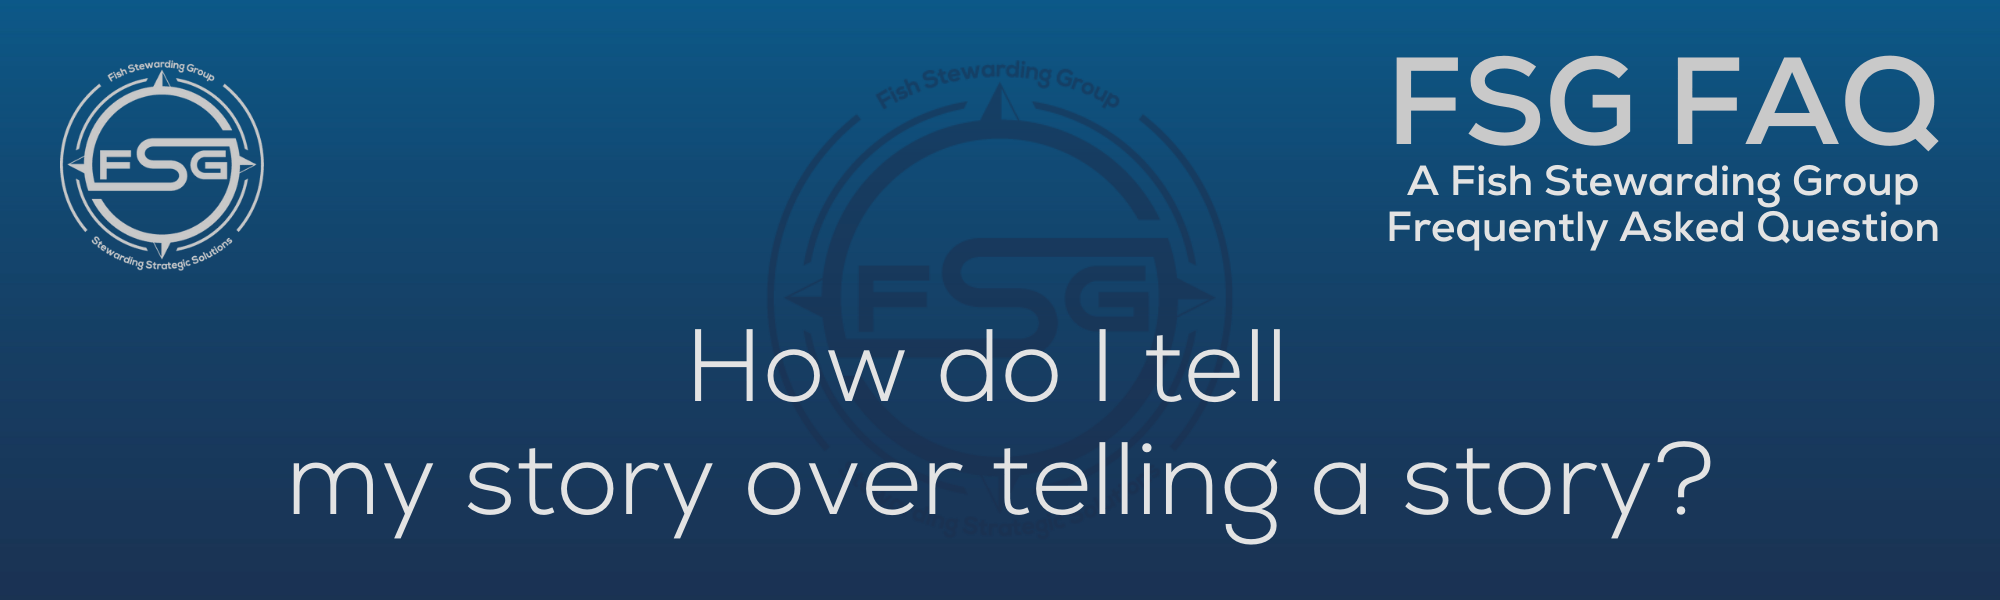 A rectangular and long thing Footer FAQ Image on the bottom of the How do I tell my story? Page on the website. The background is a blue gradient color that goes from a dark blue on the bottom to a lighter blue on top. The text in lower center of the image in a light gray text that reads: How do I tell my story? The text in gray in the upper right corner reads: FSG FAQ. Right beneath that is more gray text in a smaller font that reads: A Fish Stewarding Group Frequently Asked Question. On the upper left side is the FSG Logo in gray. The logo has the letters FSG in the middle with a circle with four pointed arrows facing north, south, east and west with the S connected to that circle. Four rounded lines make the next circle of the circle and the last layer is a thin circle with the text on the Bottom that reads Stewarding Strategist Solutions and on top, the text reads Fish Stewarding Group. And Lastly in the center background of the image is a watermarked FSG logo, faded in blue, in the background.